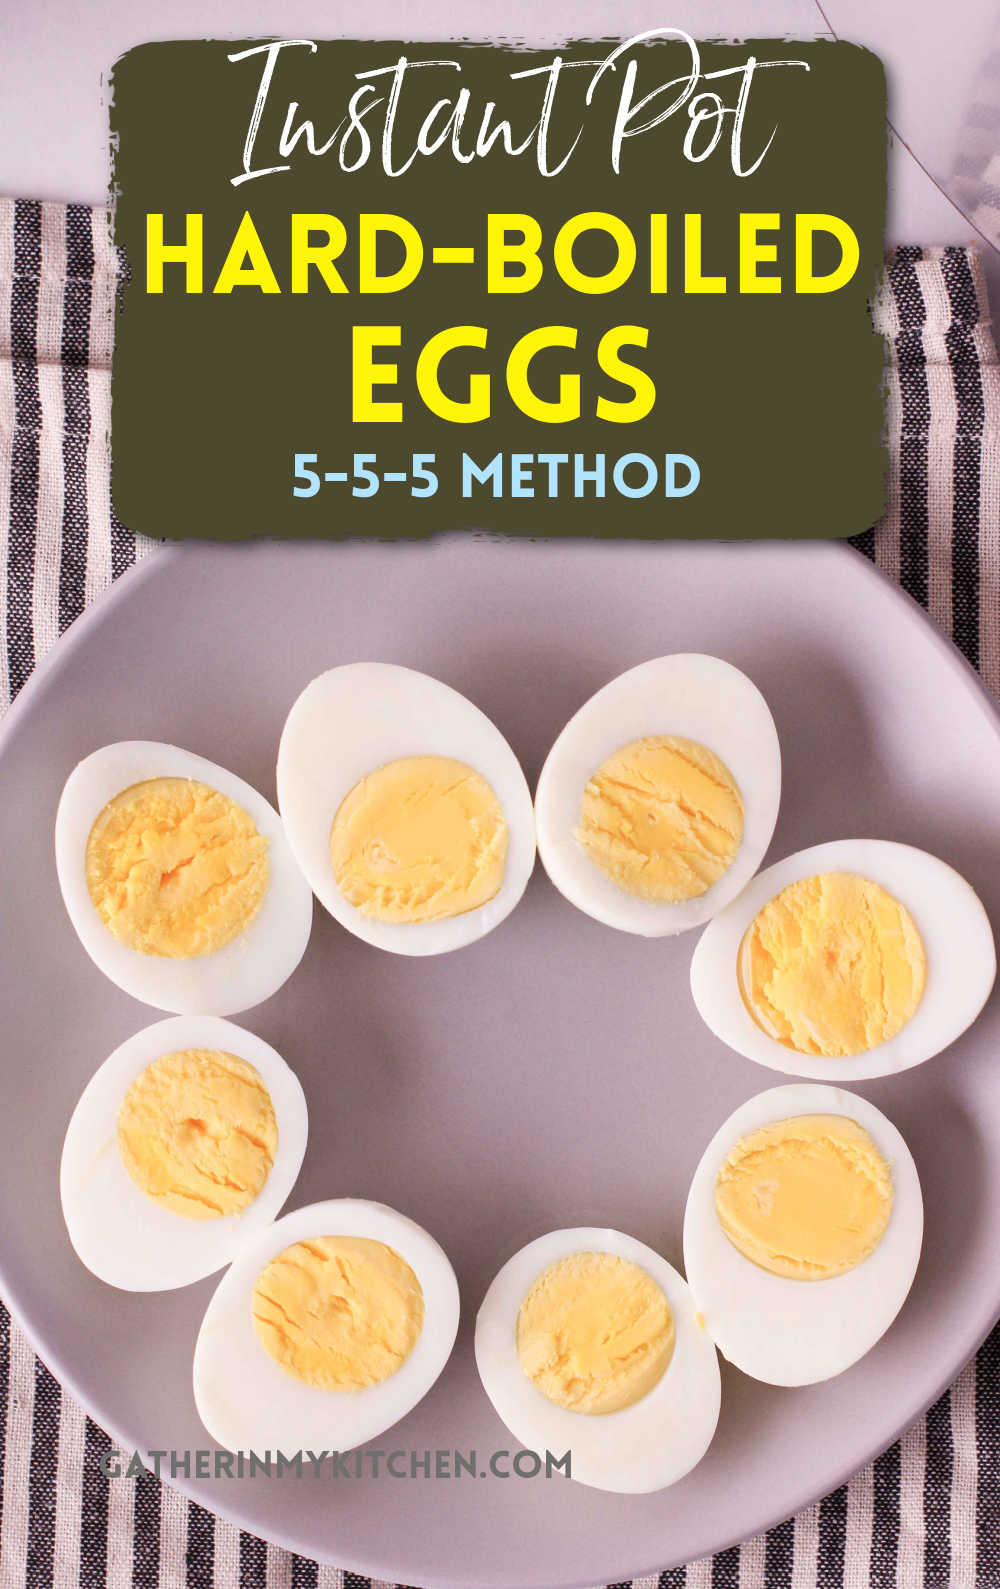 Pin Image: top says "Instant Pot Hard Beoiled eggs: 5-5-5 Method" with a pic of cut in half hard boiled eggs on a plate.